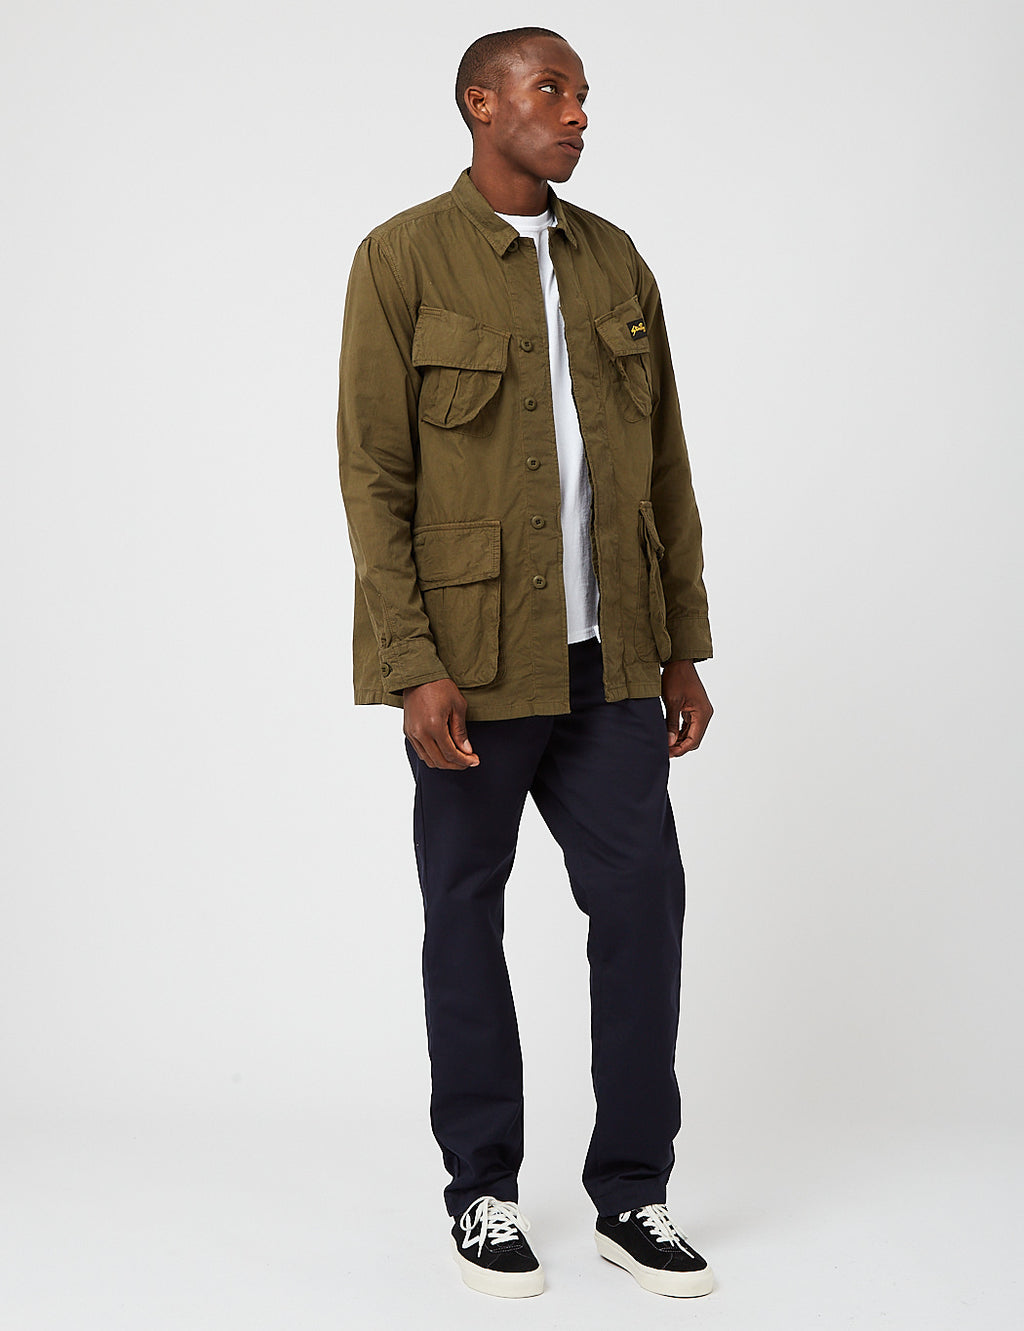 Stan Ray Tropical Jacket - Olive Poplin Green | URBAN EXCESS.